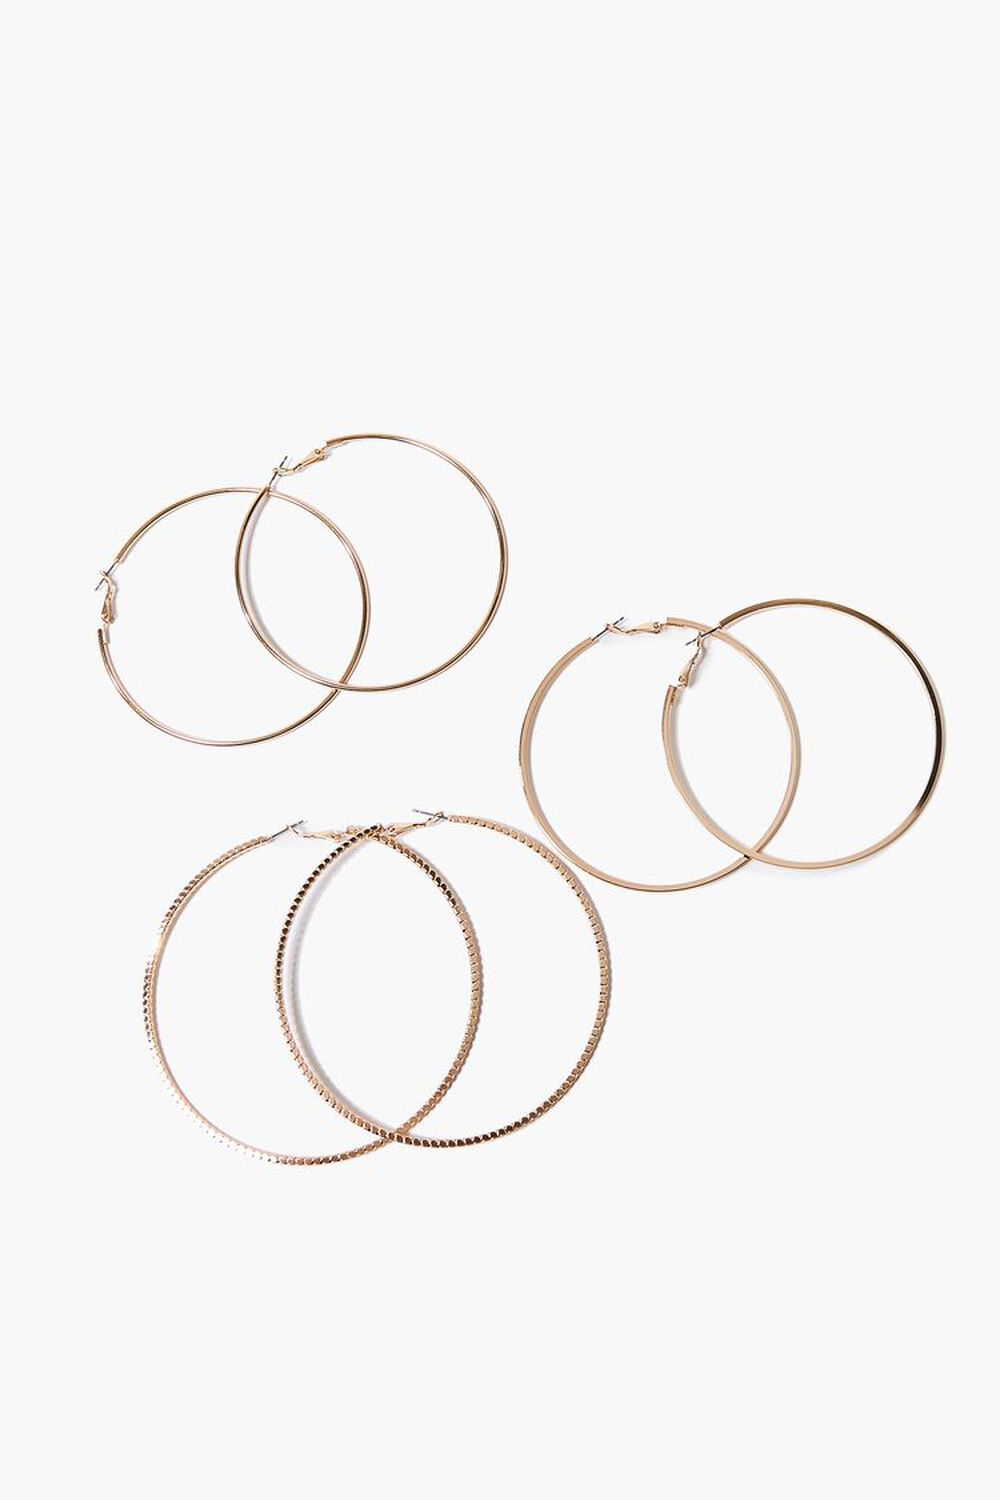 GOLD Etched & Smooth Hoop Earring Set, image 1